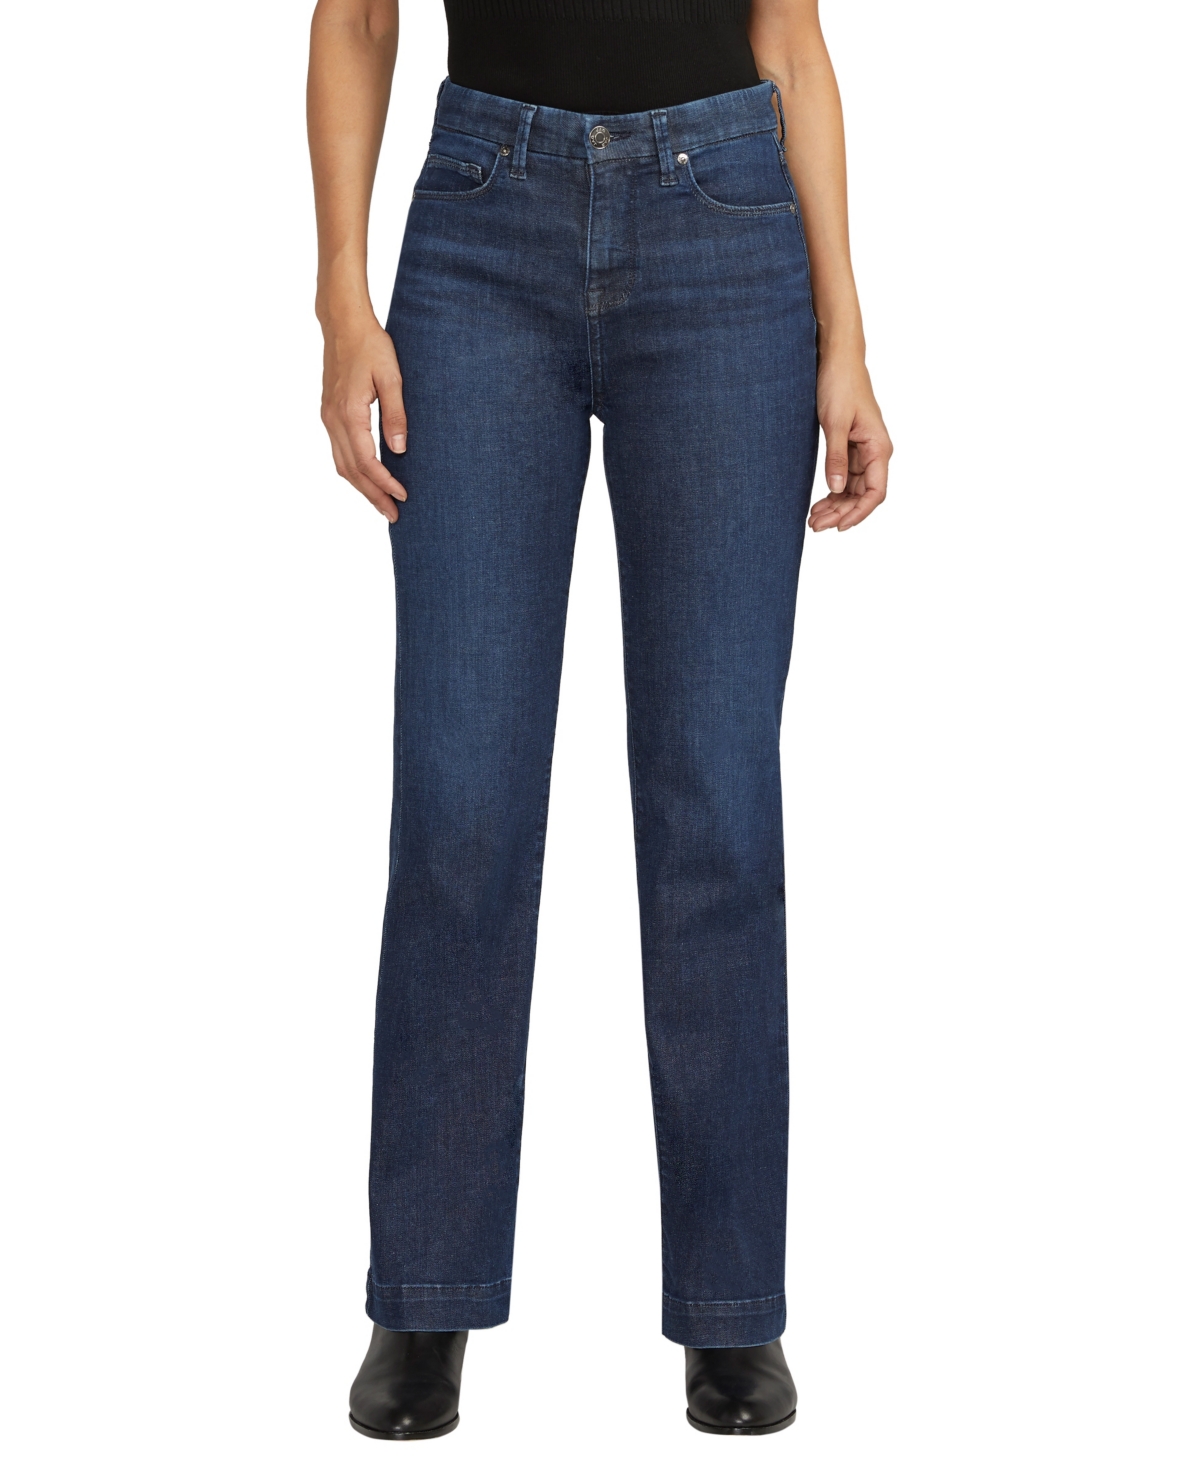 Women's Phoebe High Rise Bootcut Jeans - Stardust